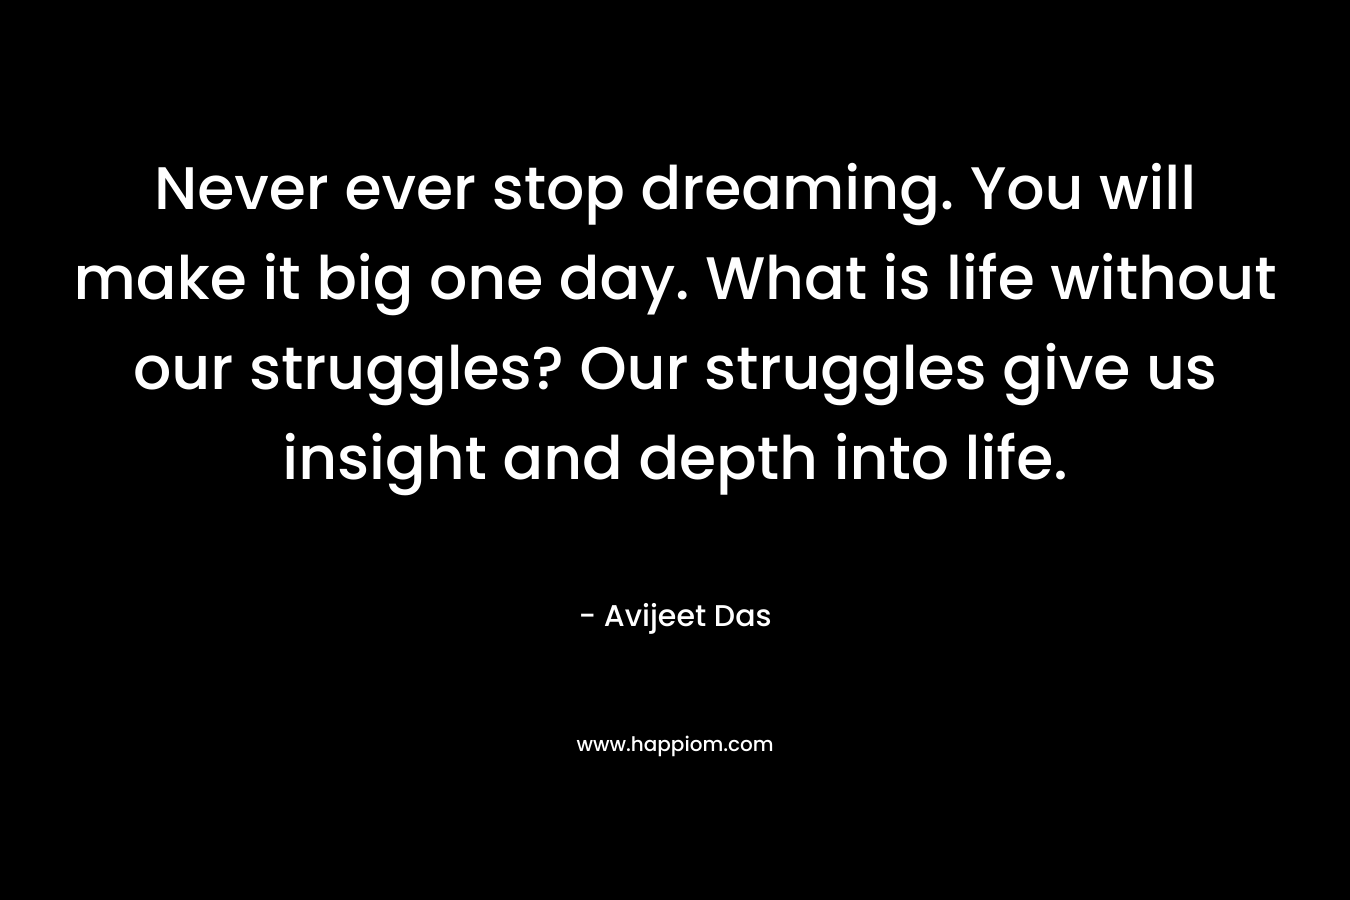 Never ever stop dreaming. You will make it big one day. What is life without our struggles? Our struggles give us insight and depth into life.